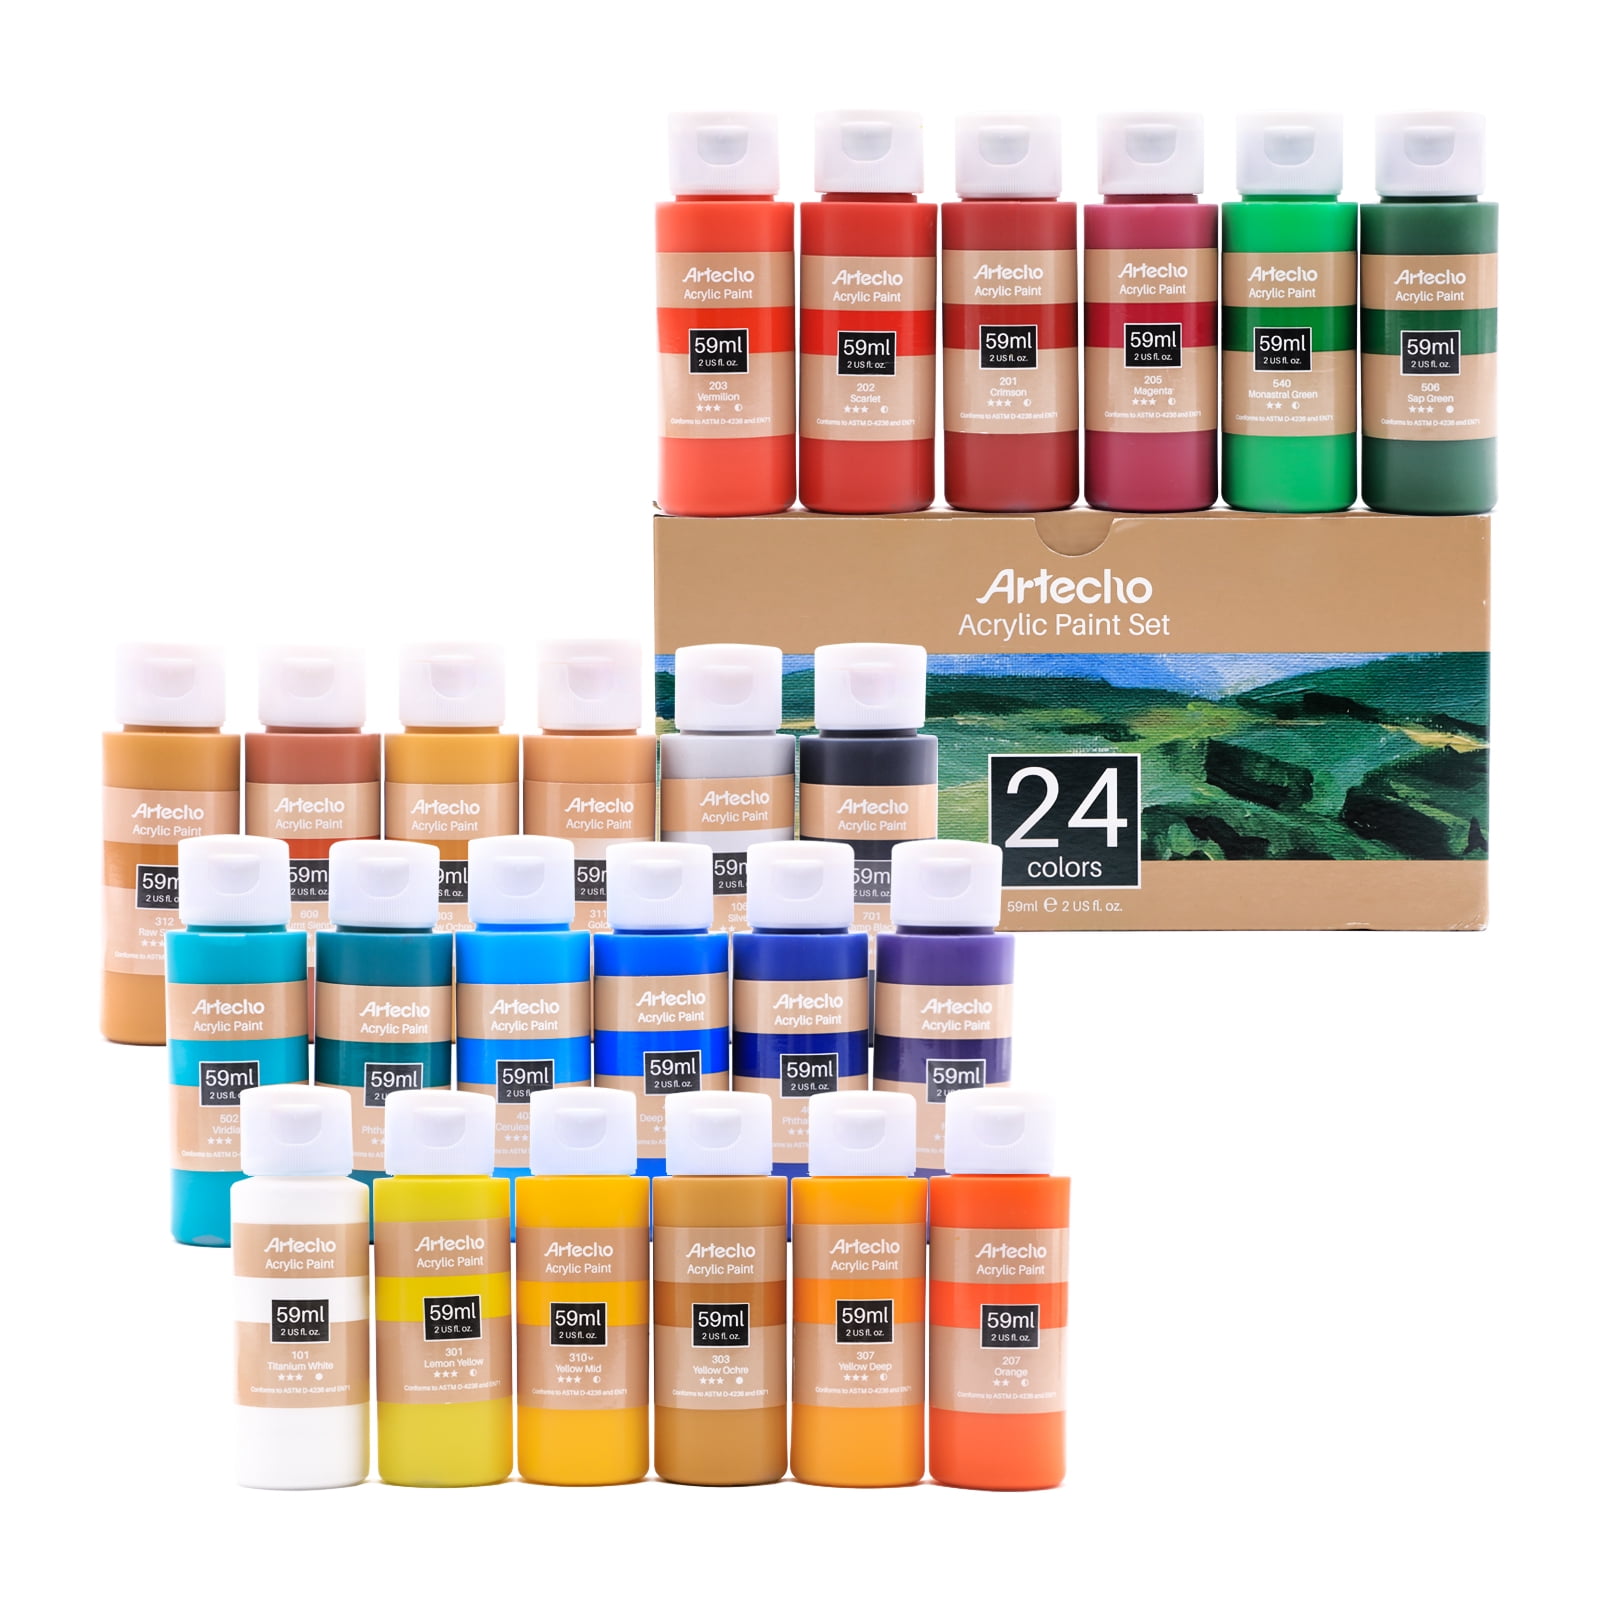 RoseArt Premium Paint Set - 24 Count Acrylic Paints for Canvas, Wood, Ceramic and Fabrics - Craft Painting Supplies for Casua